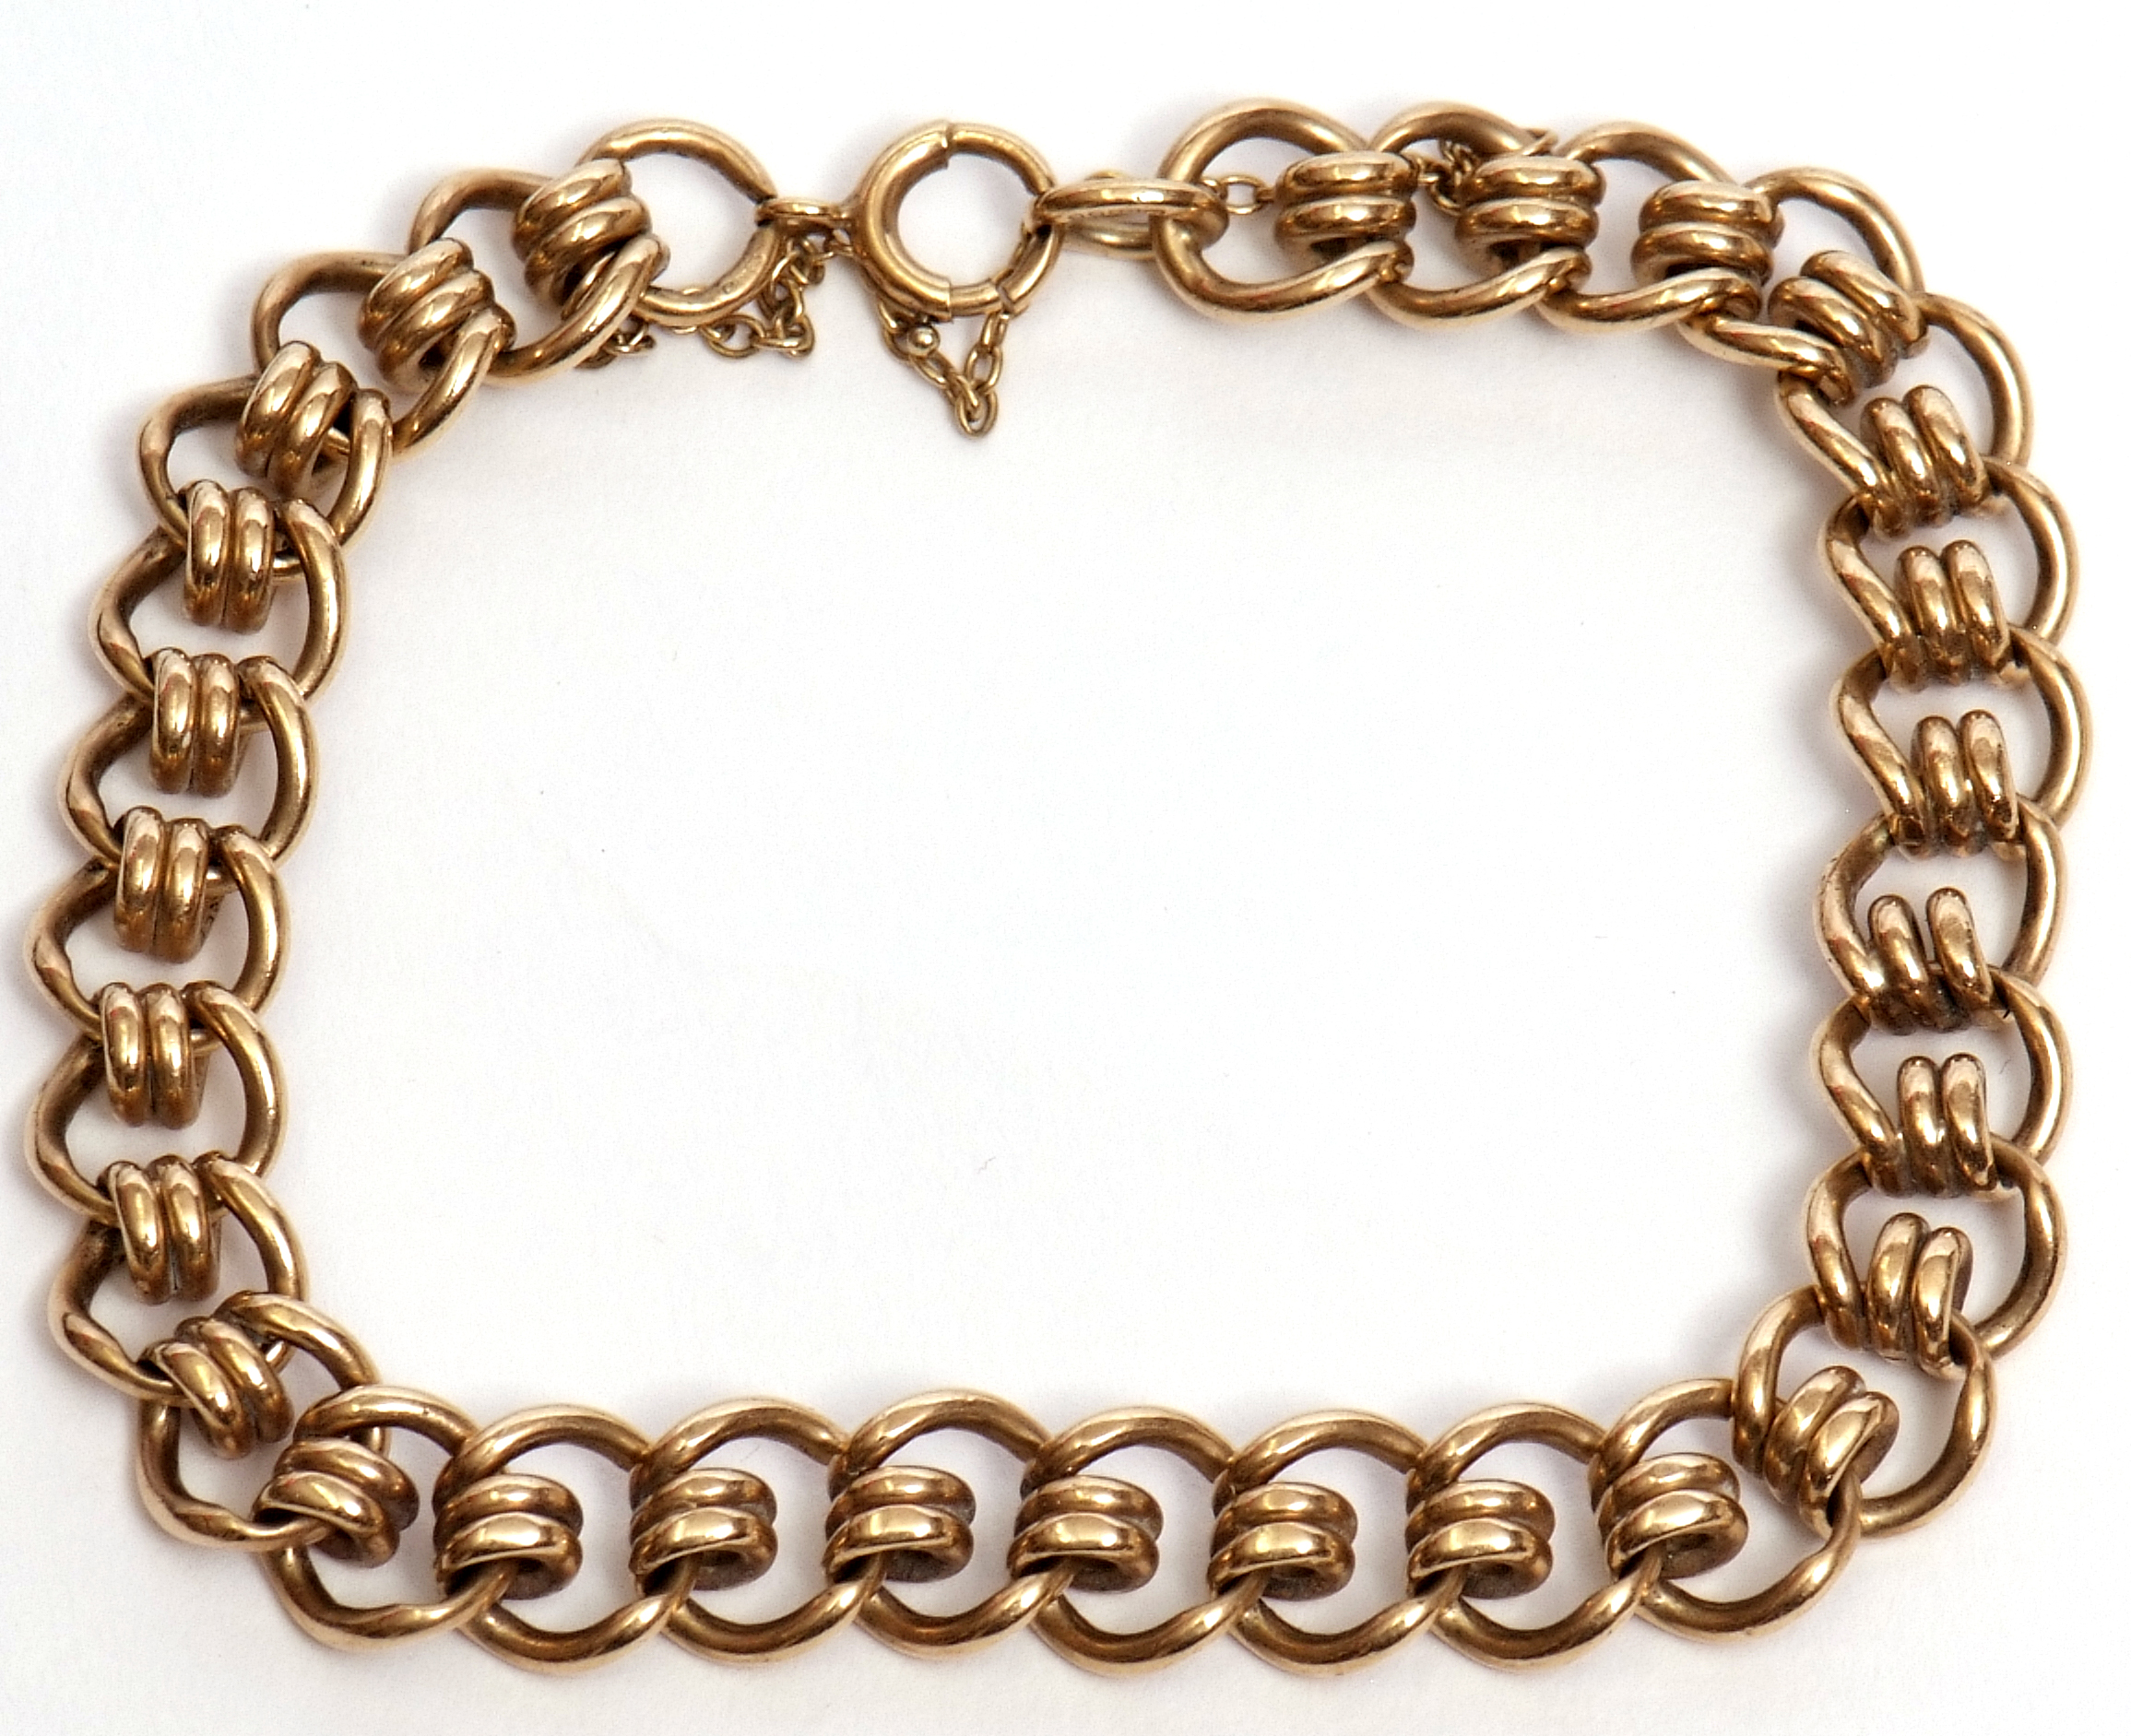 9ct gold curb and coil link bracelet, safety chain fitting, hallmarked Birmingham 1982, 27.8gms - Image 2 of 2